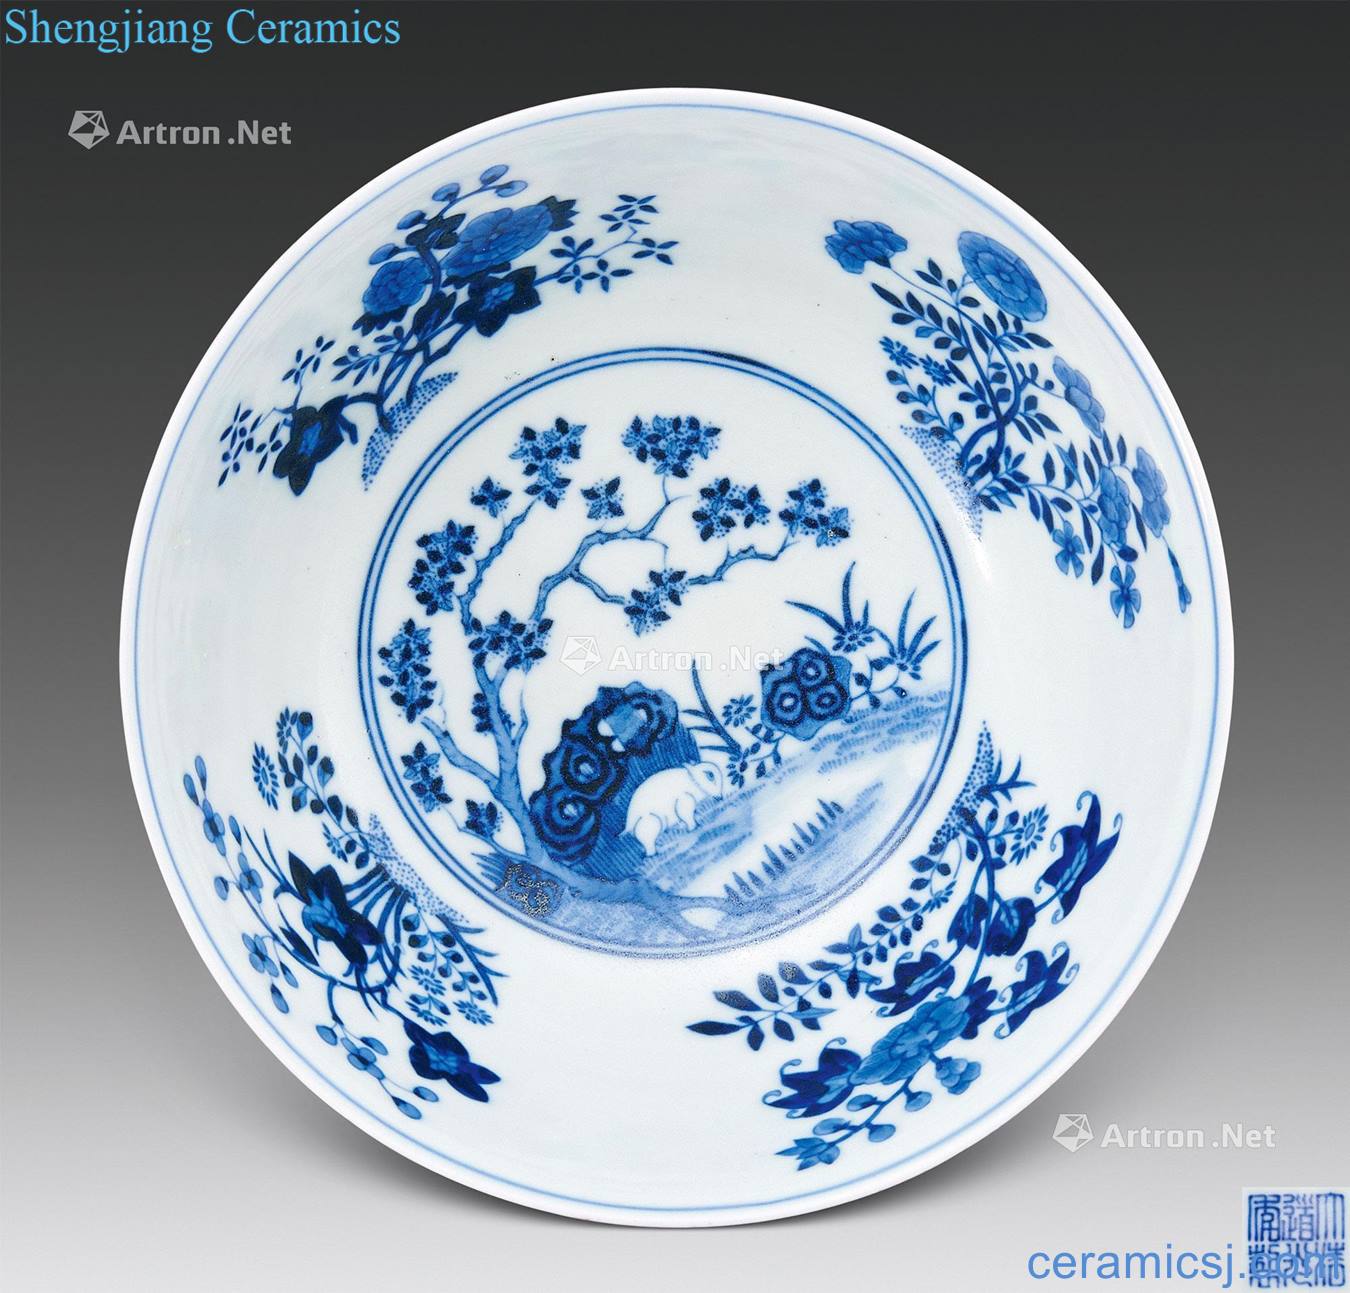 Qing daoguang Kiln outside pastel blue window within the bowl